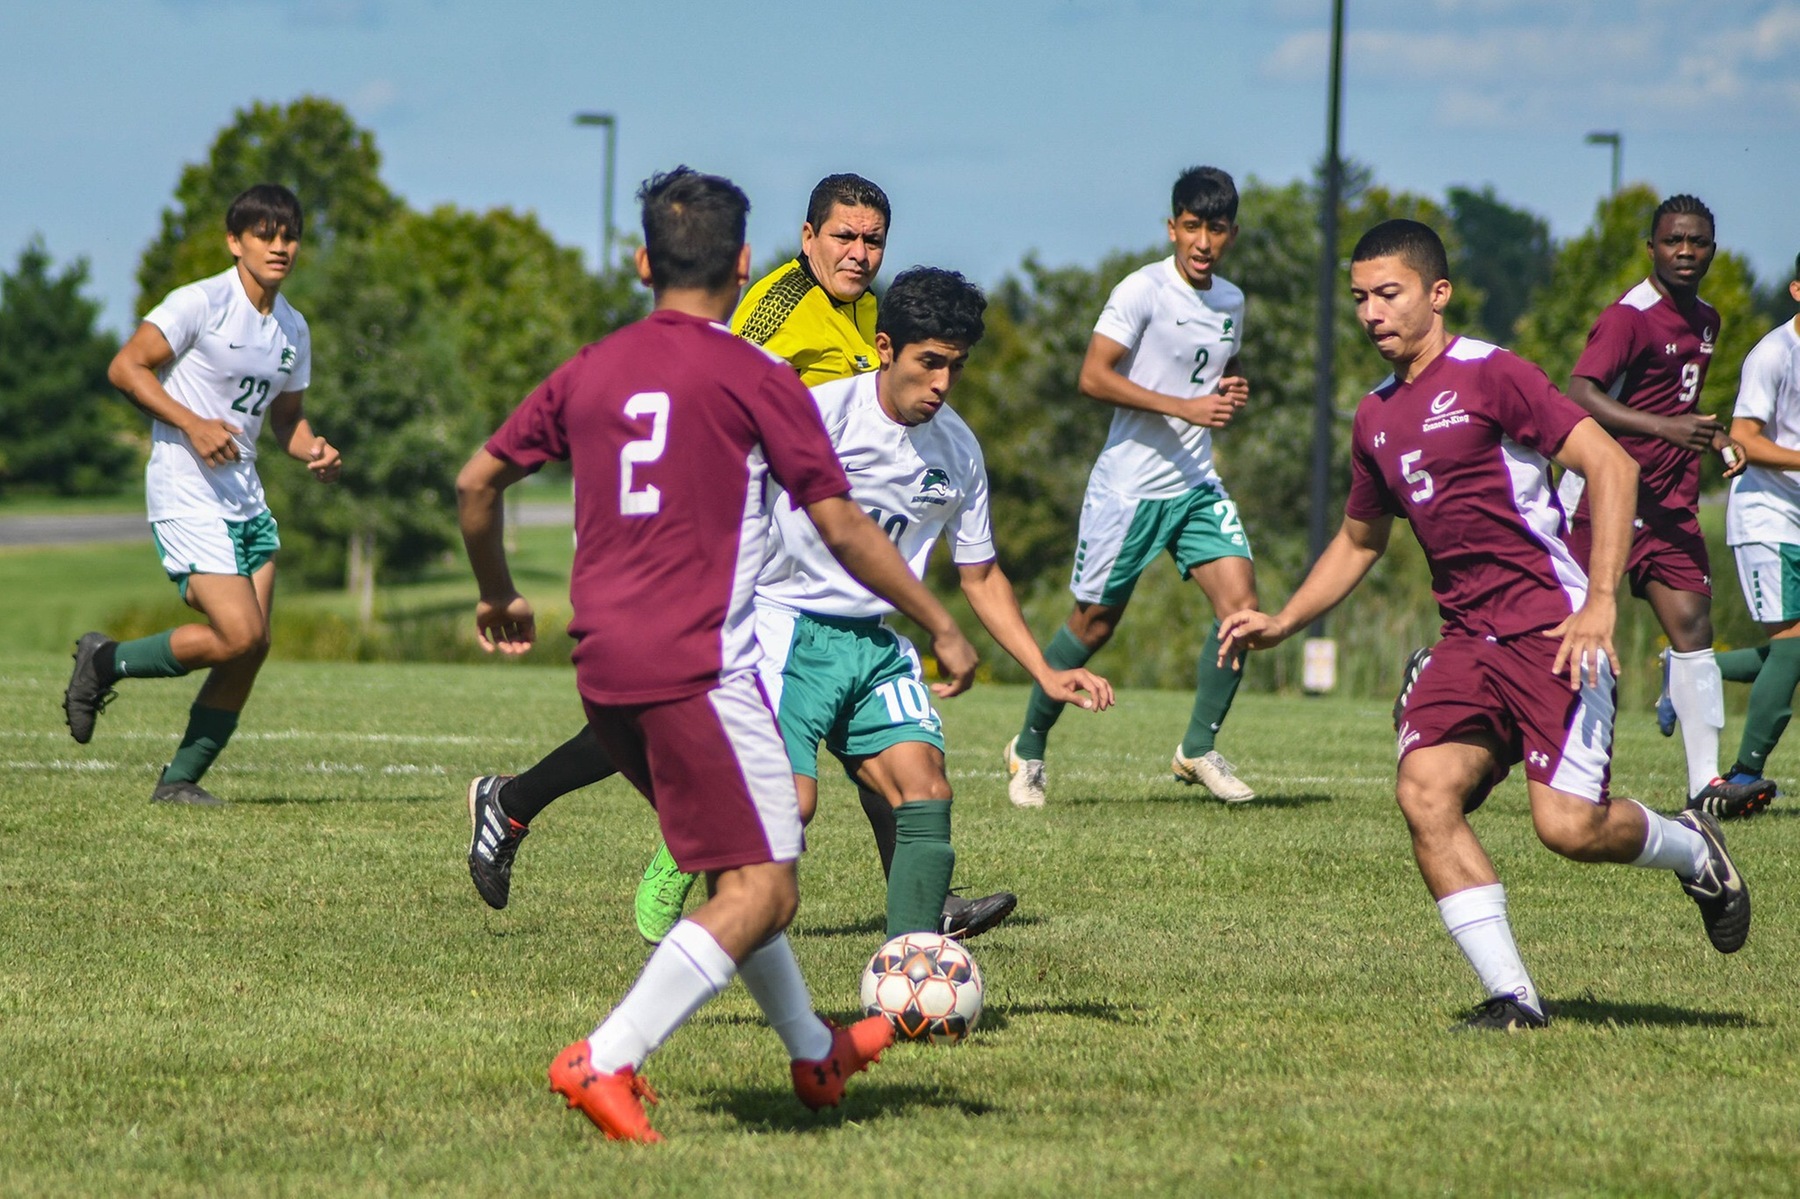 Kish off to a great early season start for Men's Soccer